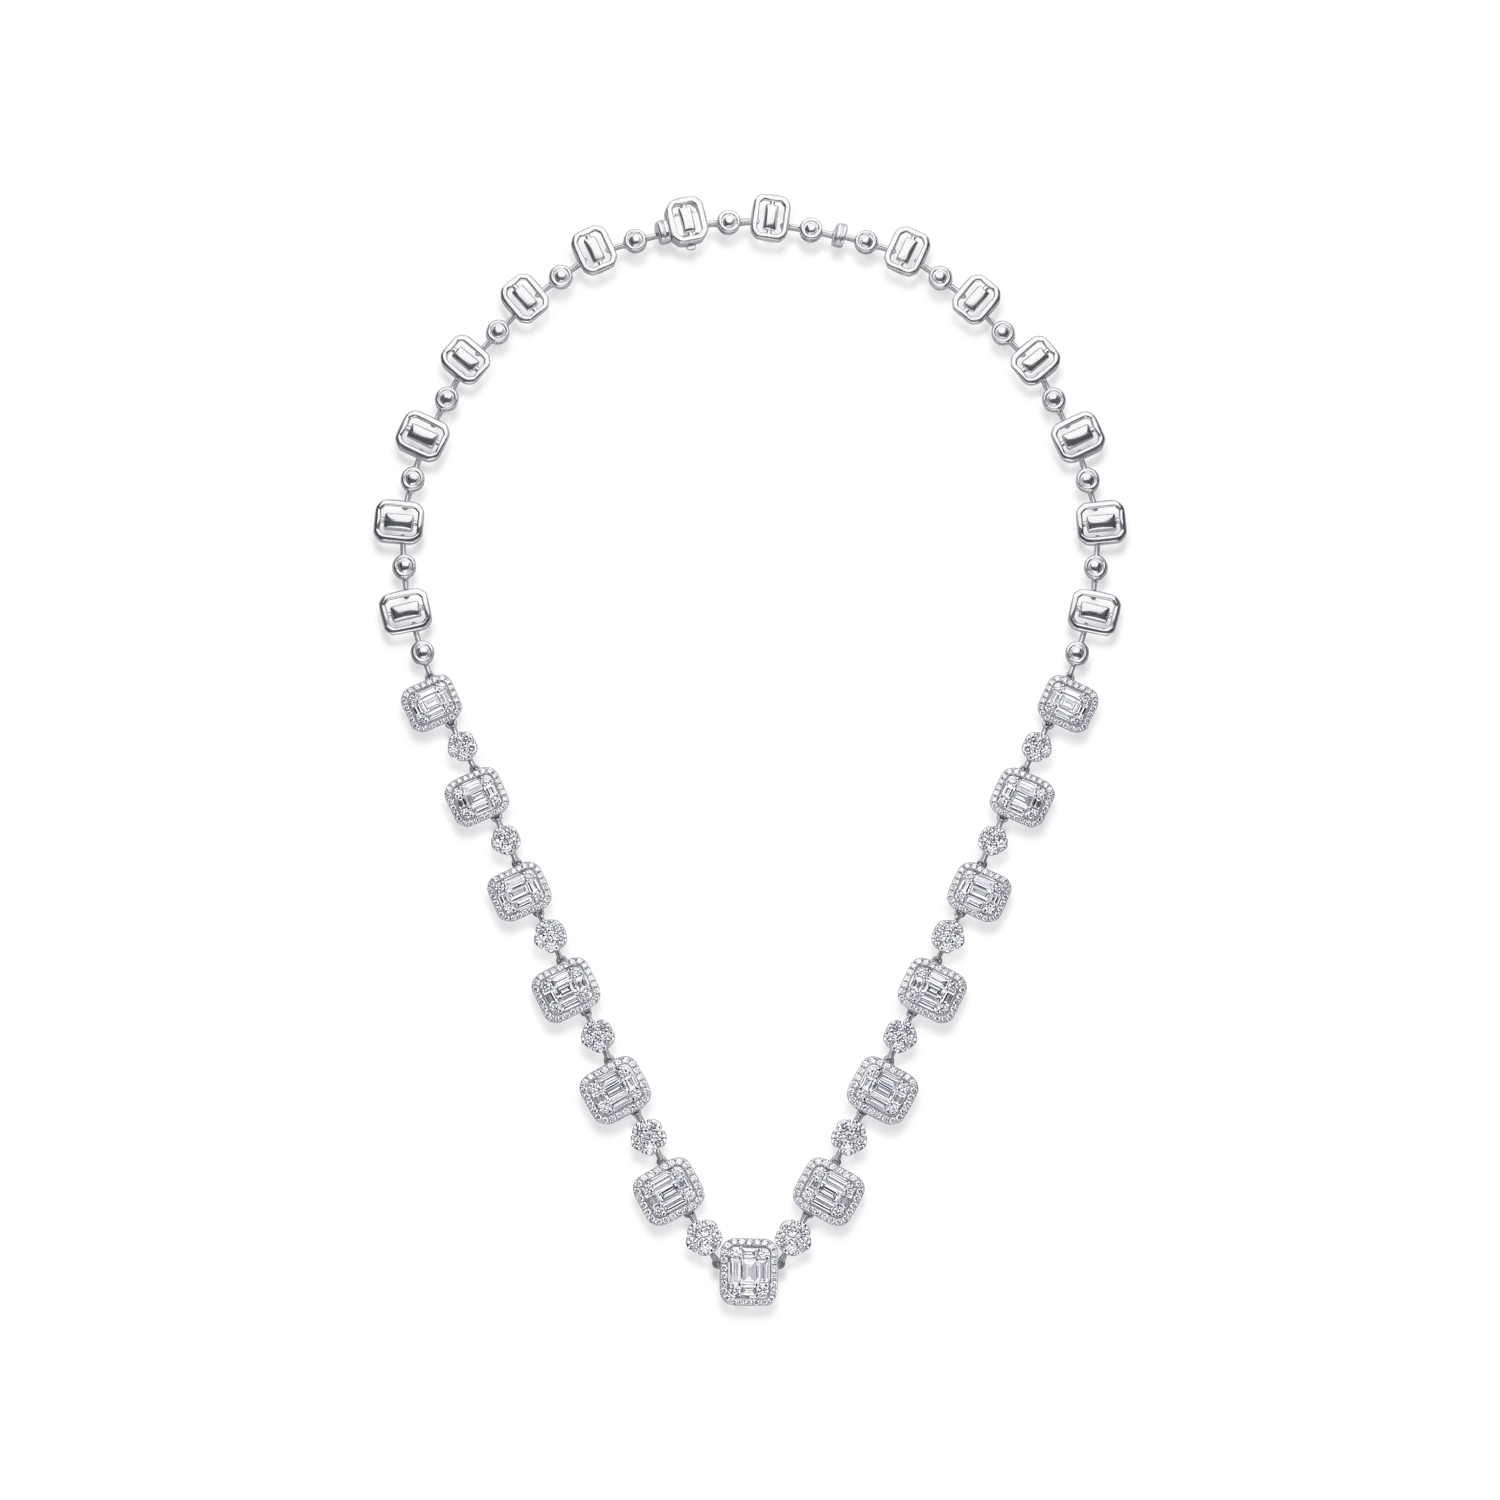 18K white gold necklace with 4.65ct diamonds